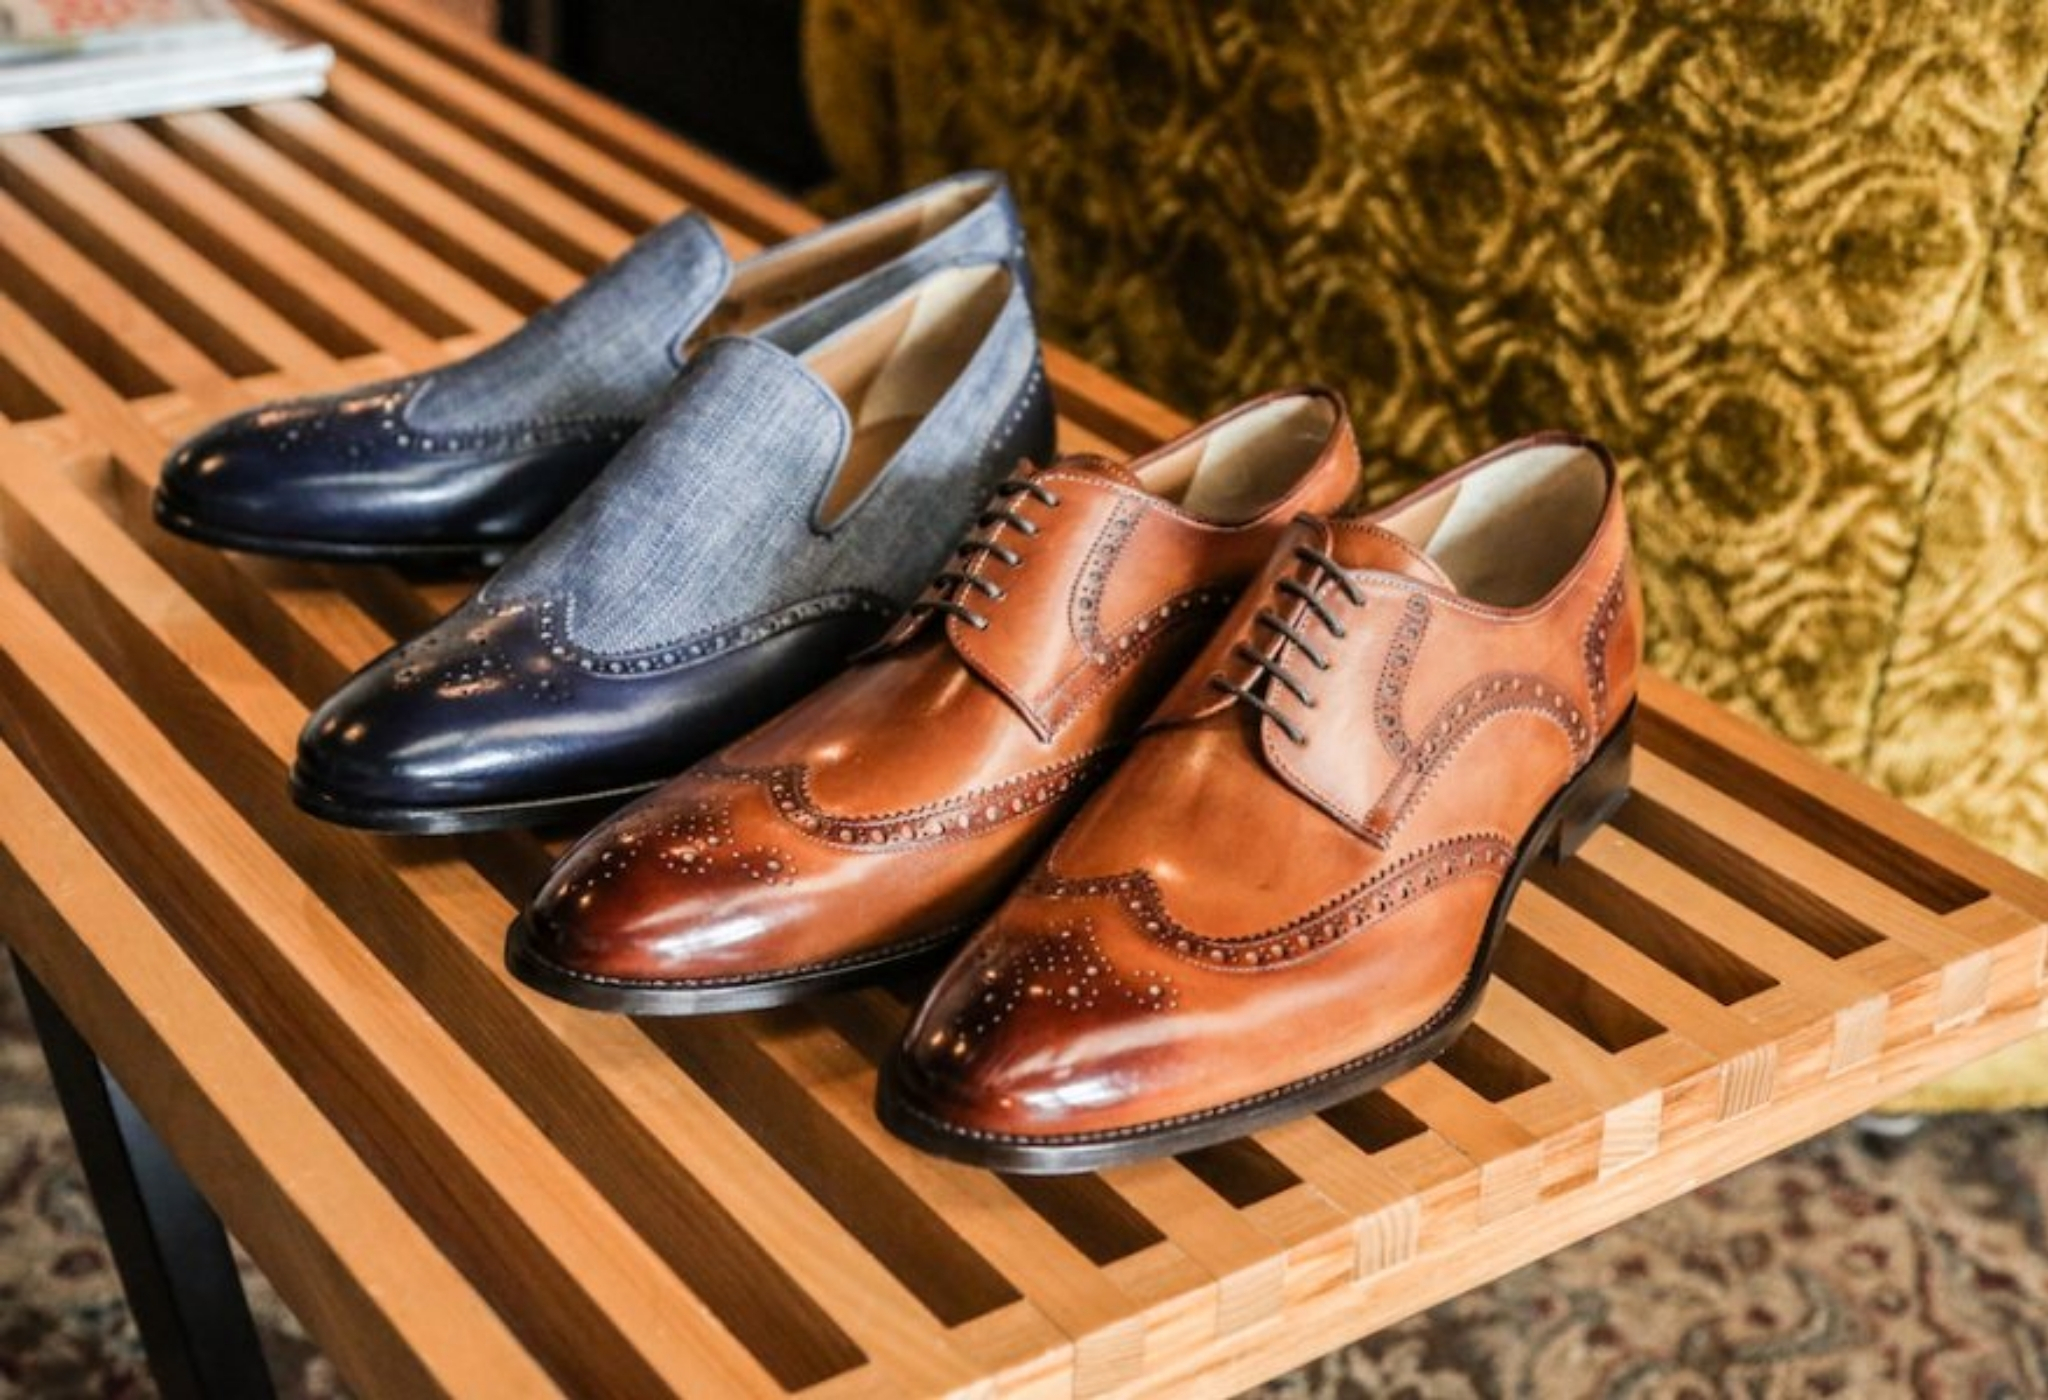 mute Appointment theme 5 Rules On Wearing Dress Shoes With Jeans | Pairing Denim & Men's Dress  Shoes Seamlessly